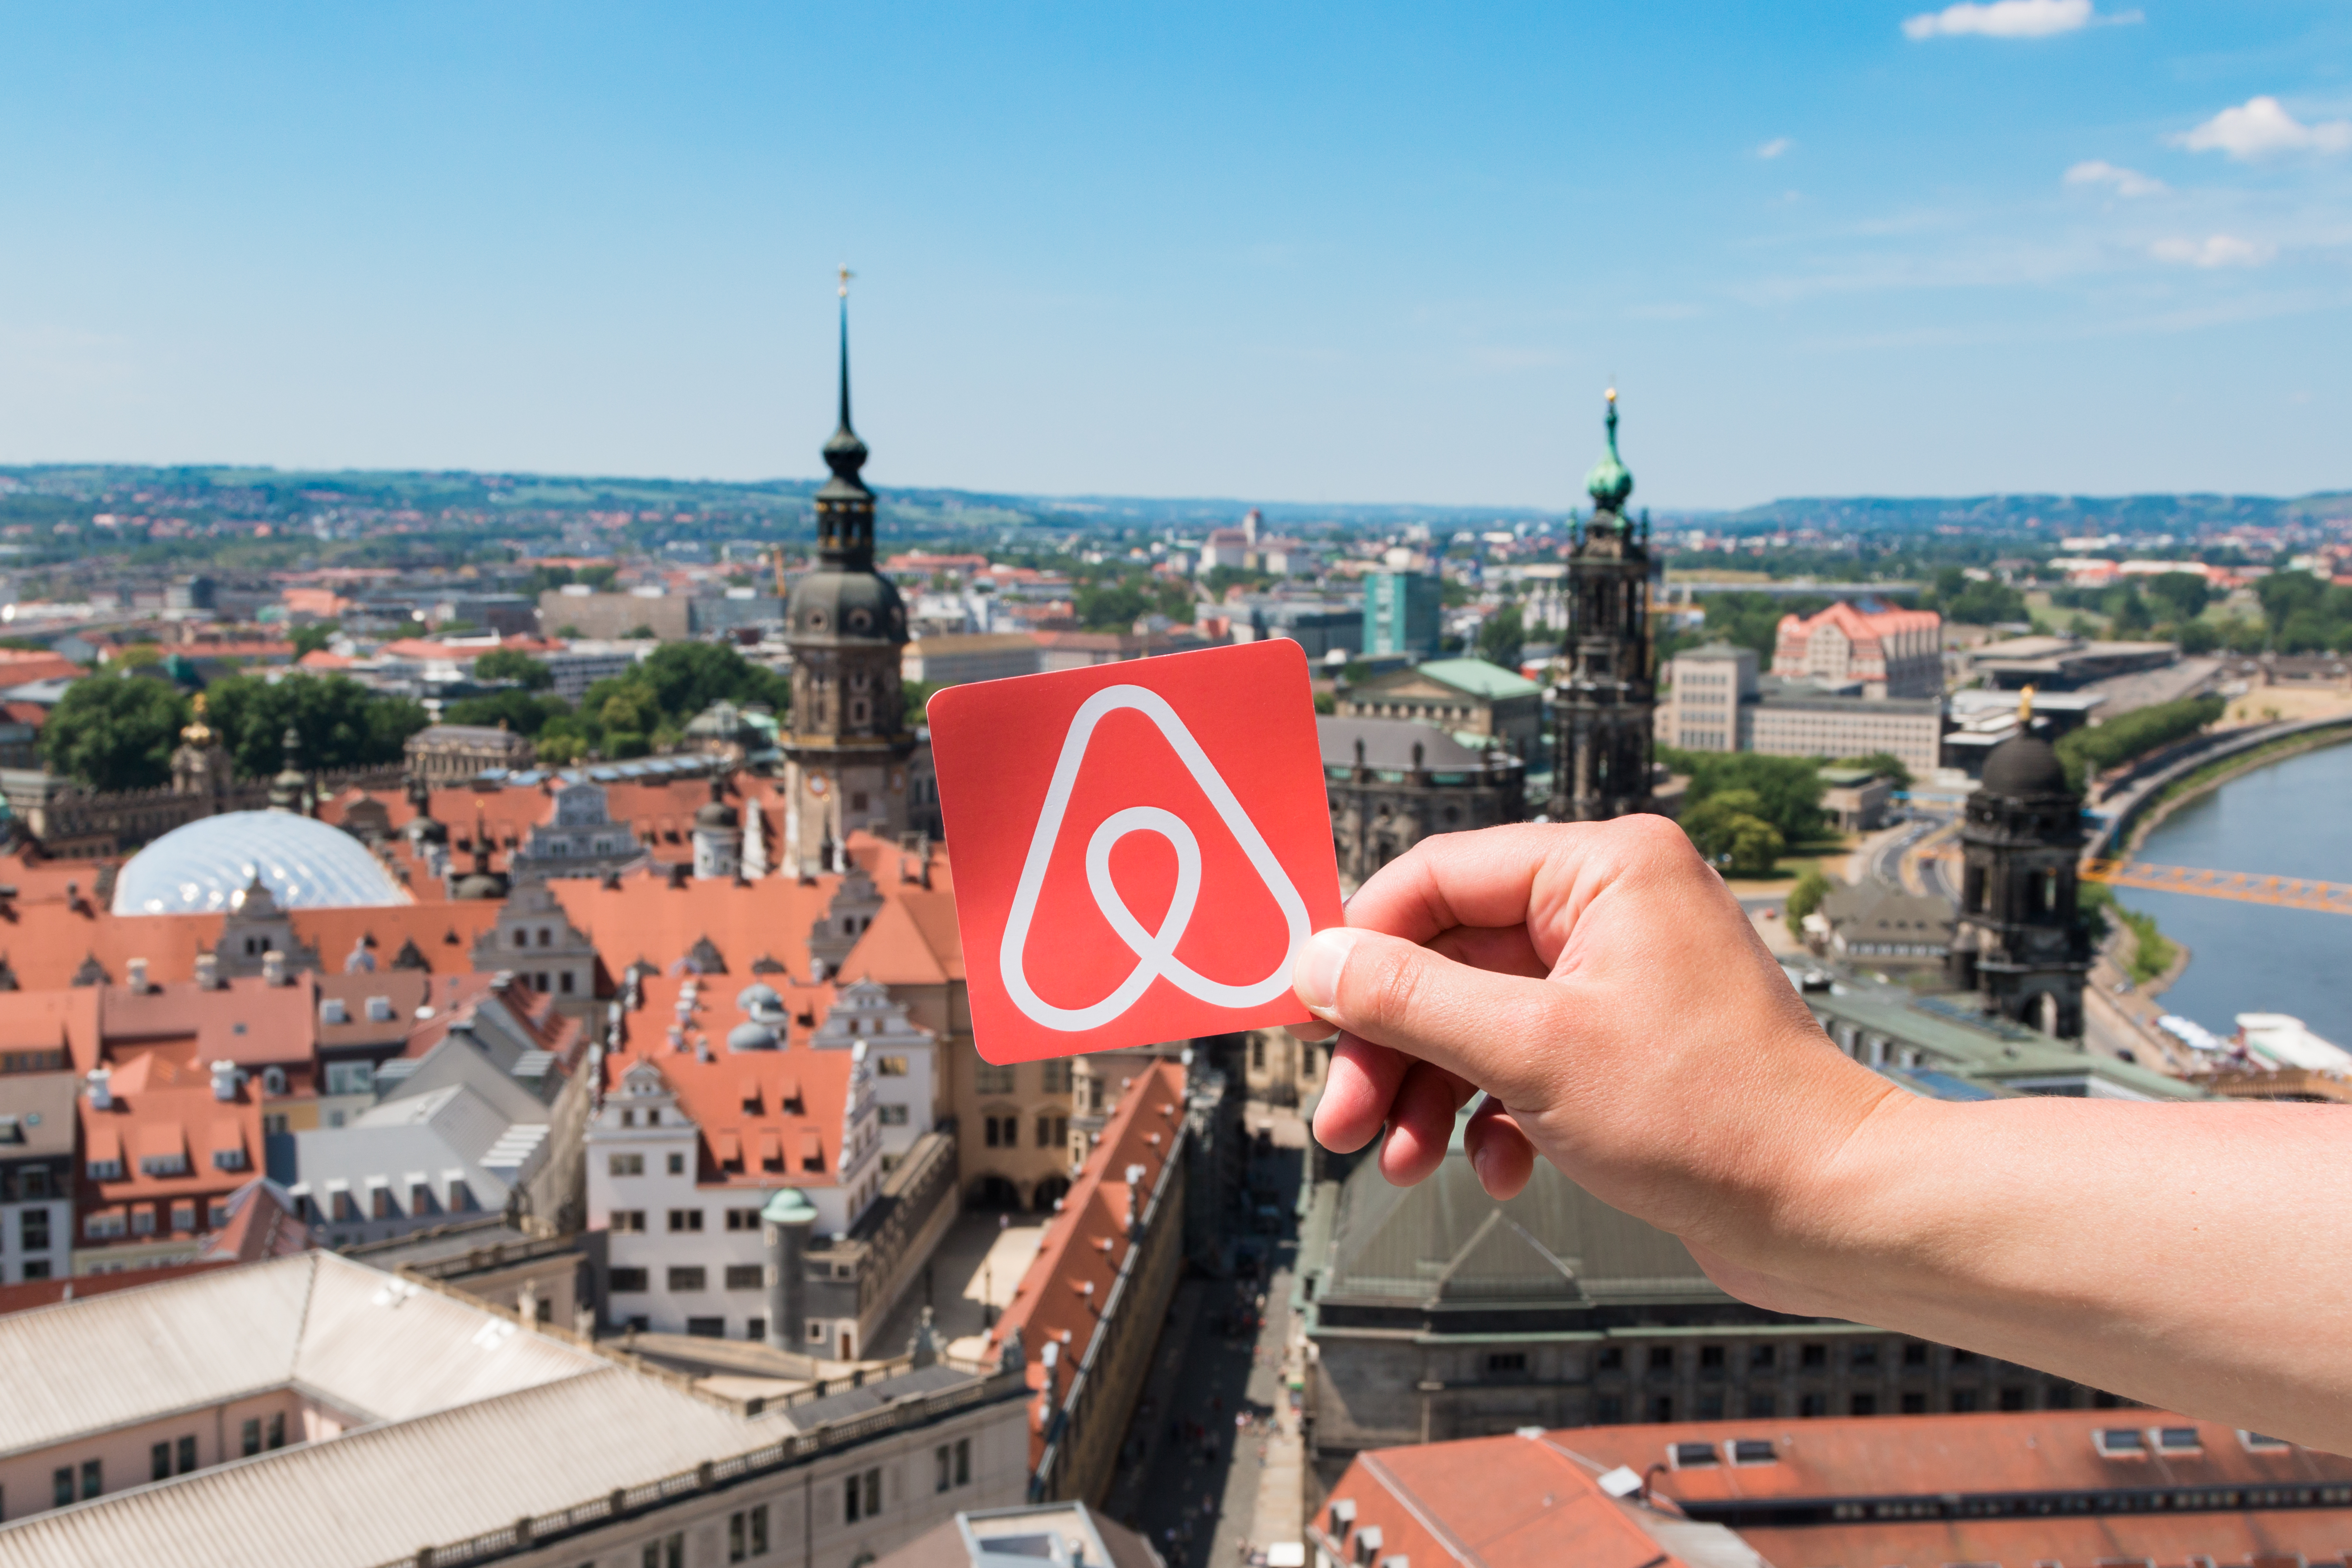 Airbnb stock reddit investing in high inflation countries with zika